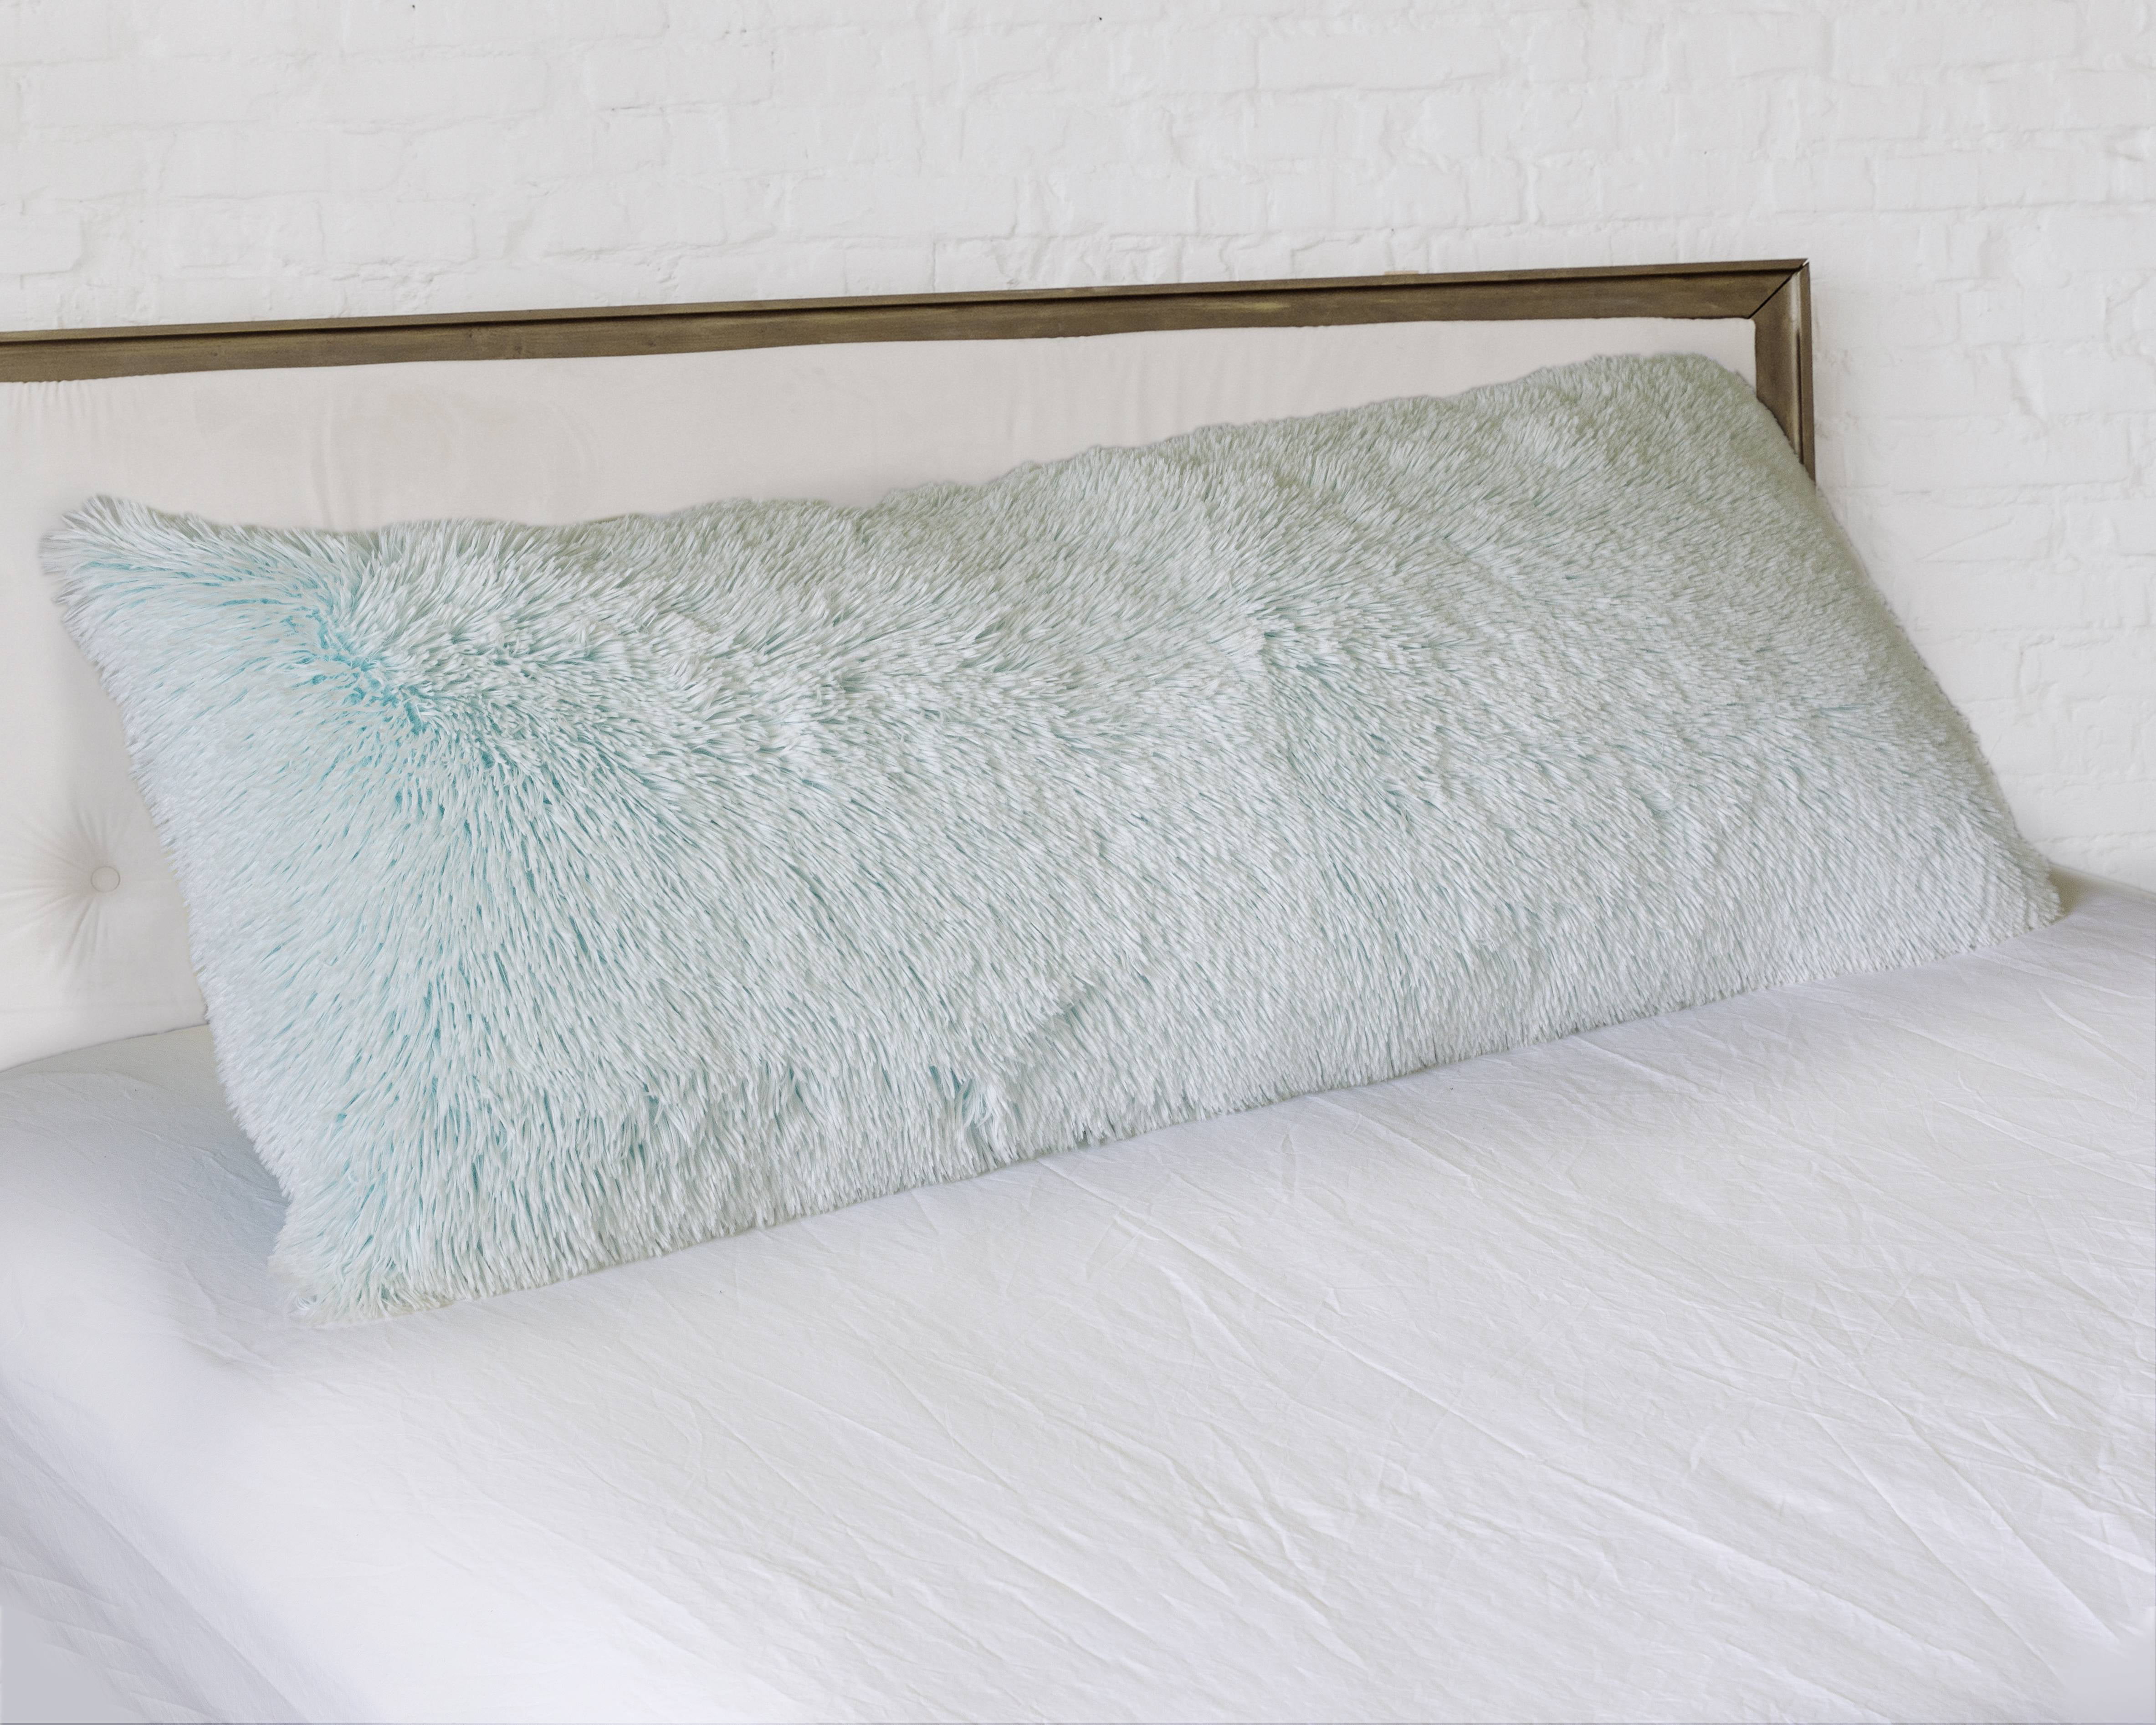 turquoise fluffy pillows